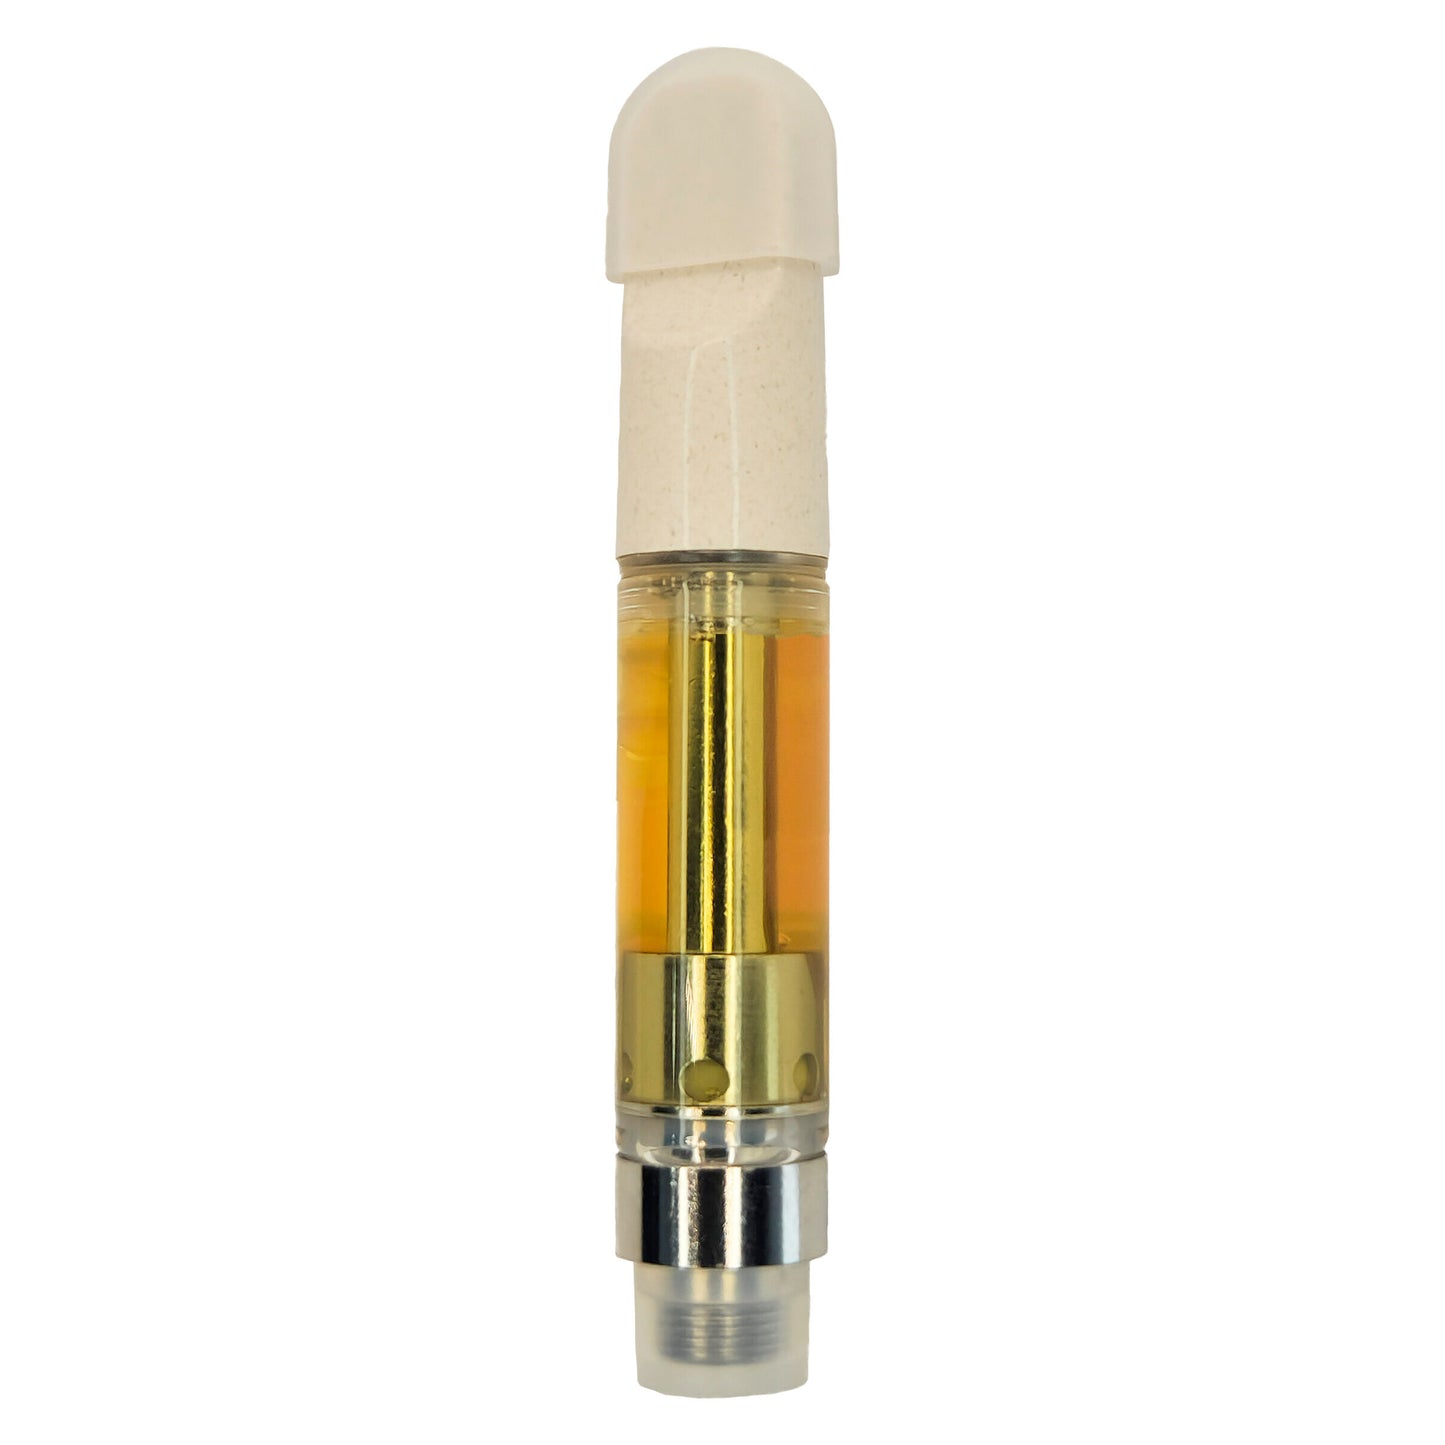 Wildcard Extracts - Small Batch Resin 510 Thread Cartridge